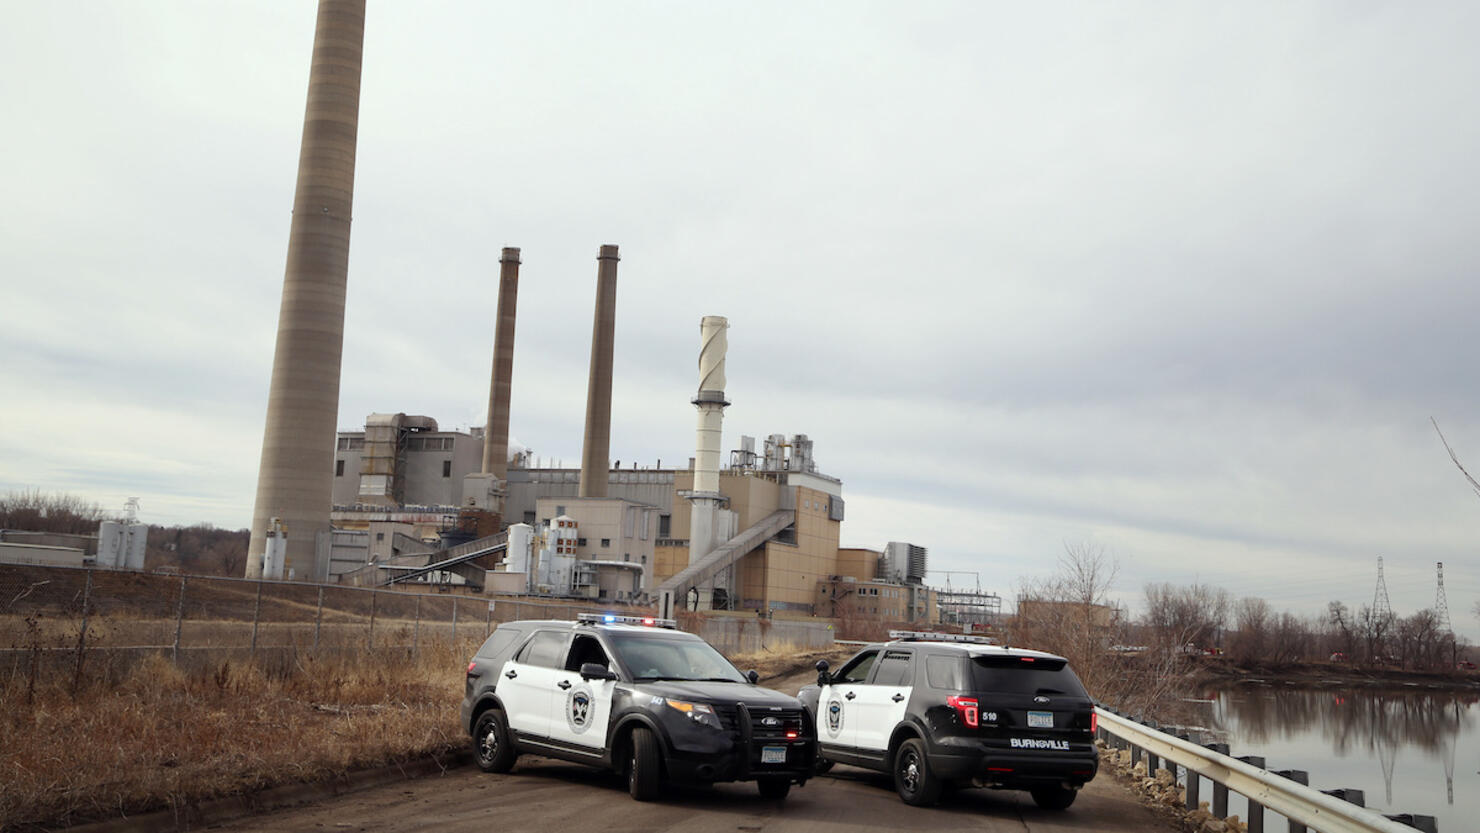 Fire broke out inside at Xcel Energy coal-fired power plant Monday March 16, 2015 in Burnsville, Minnesota. ]  Jerry Holt/ Jerry.Holt@Startribune.com